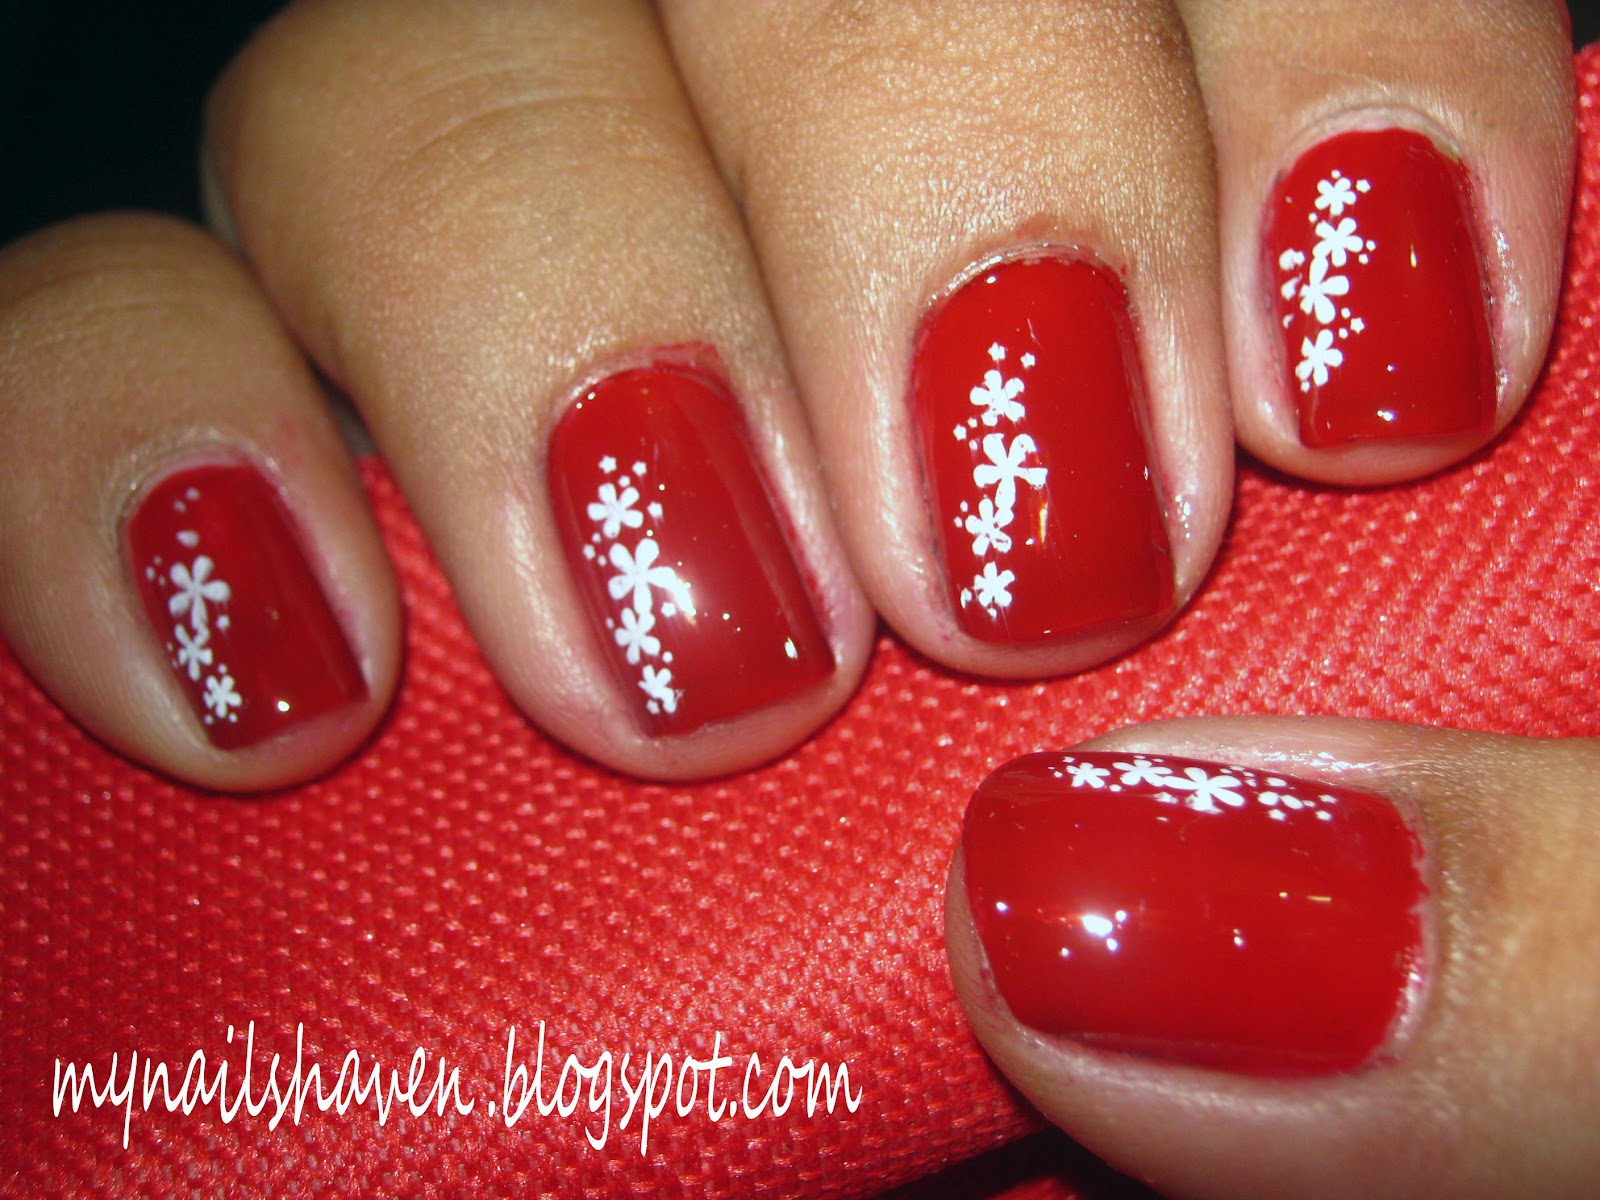 Red and White Polka Dot Nails - wide 6